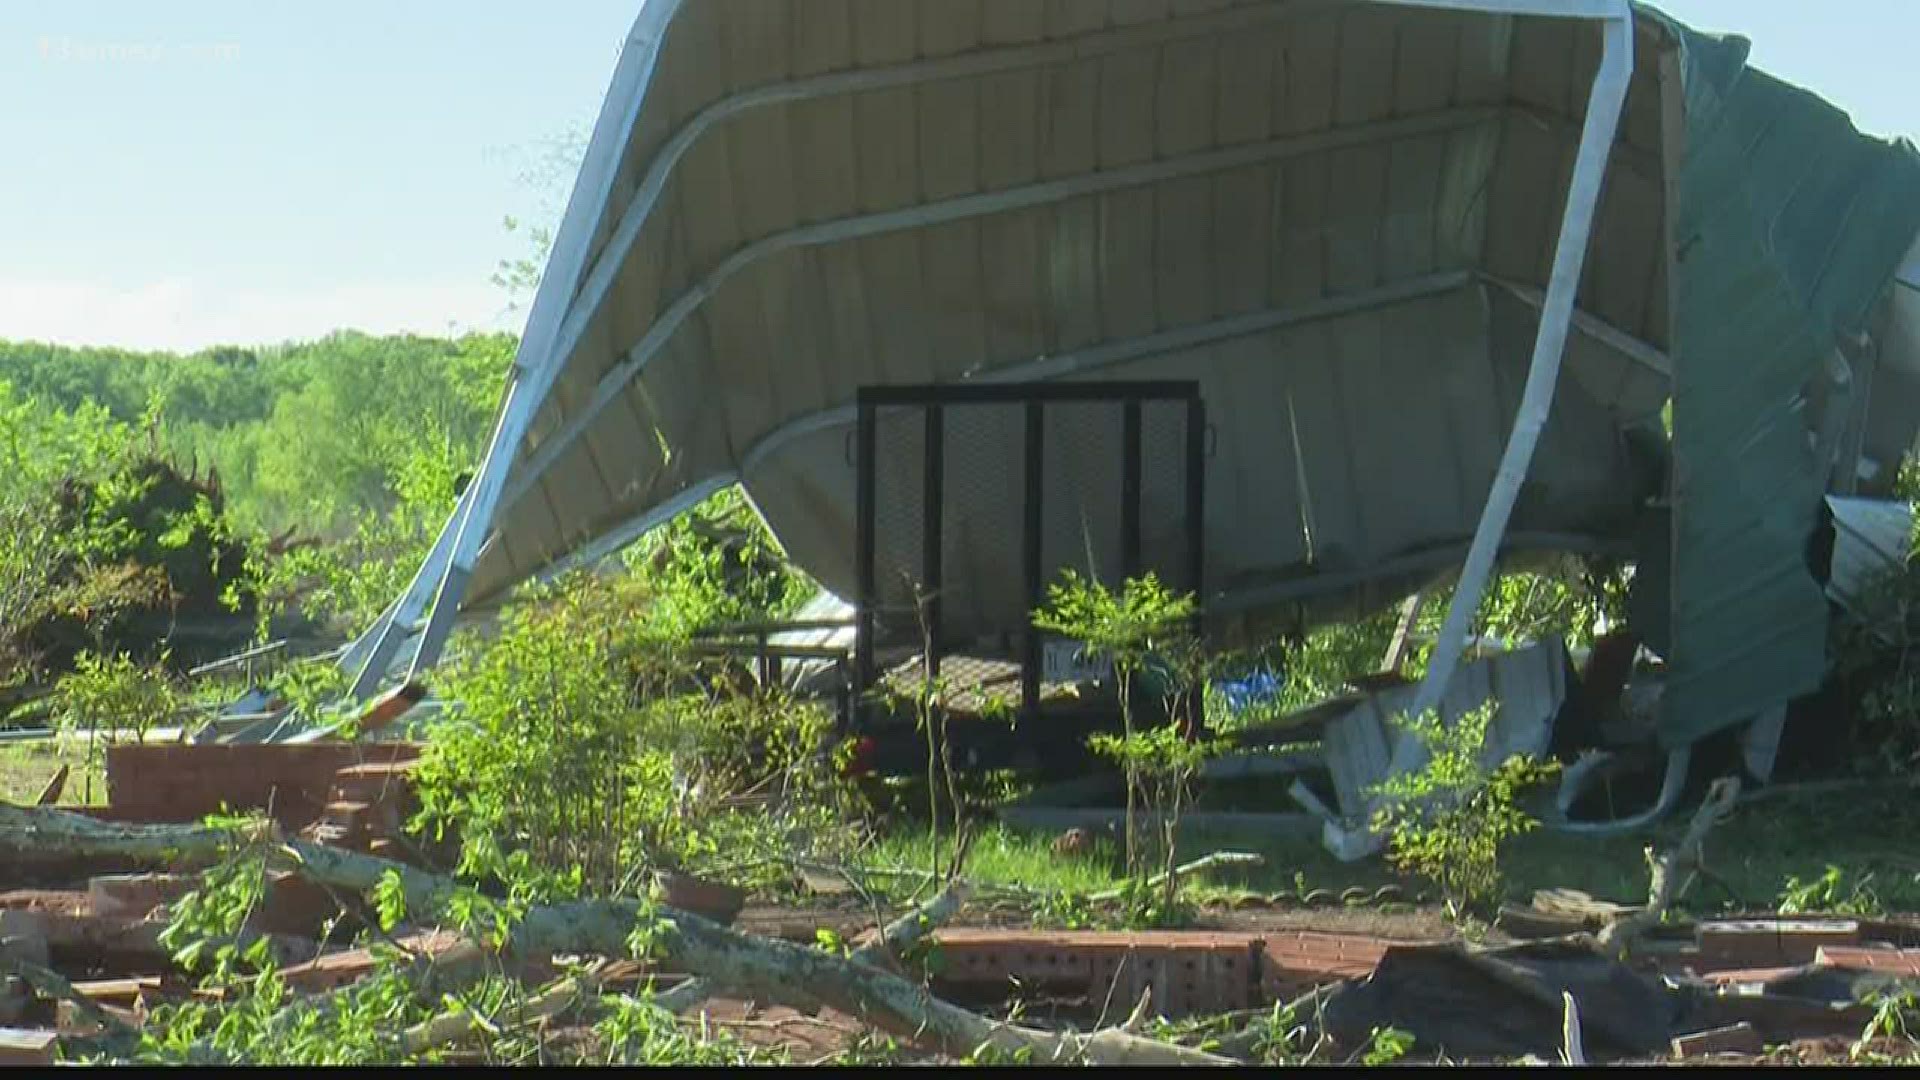 One couple in Upson County said they woke up to a scene right out of "The Wizard of Oz" when a house was picked up by the storm and landed right on Highway 74.